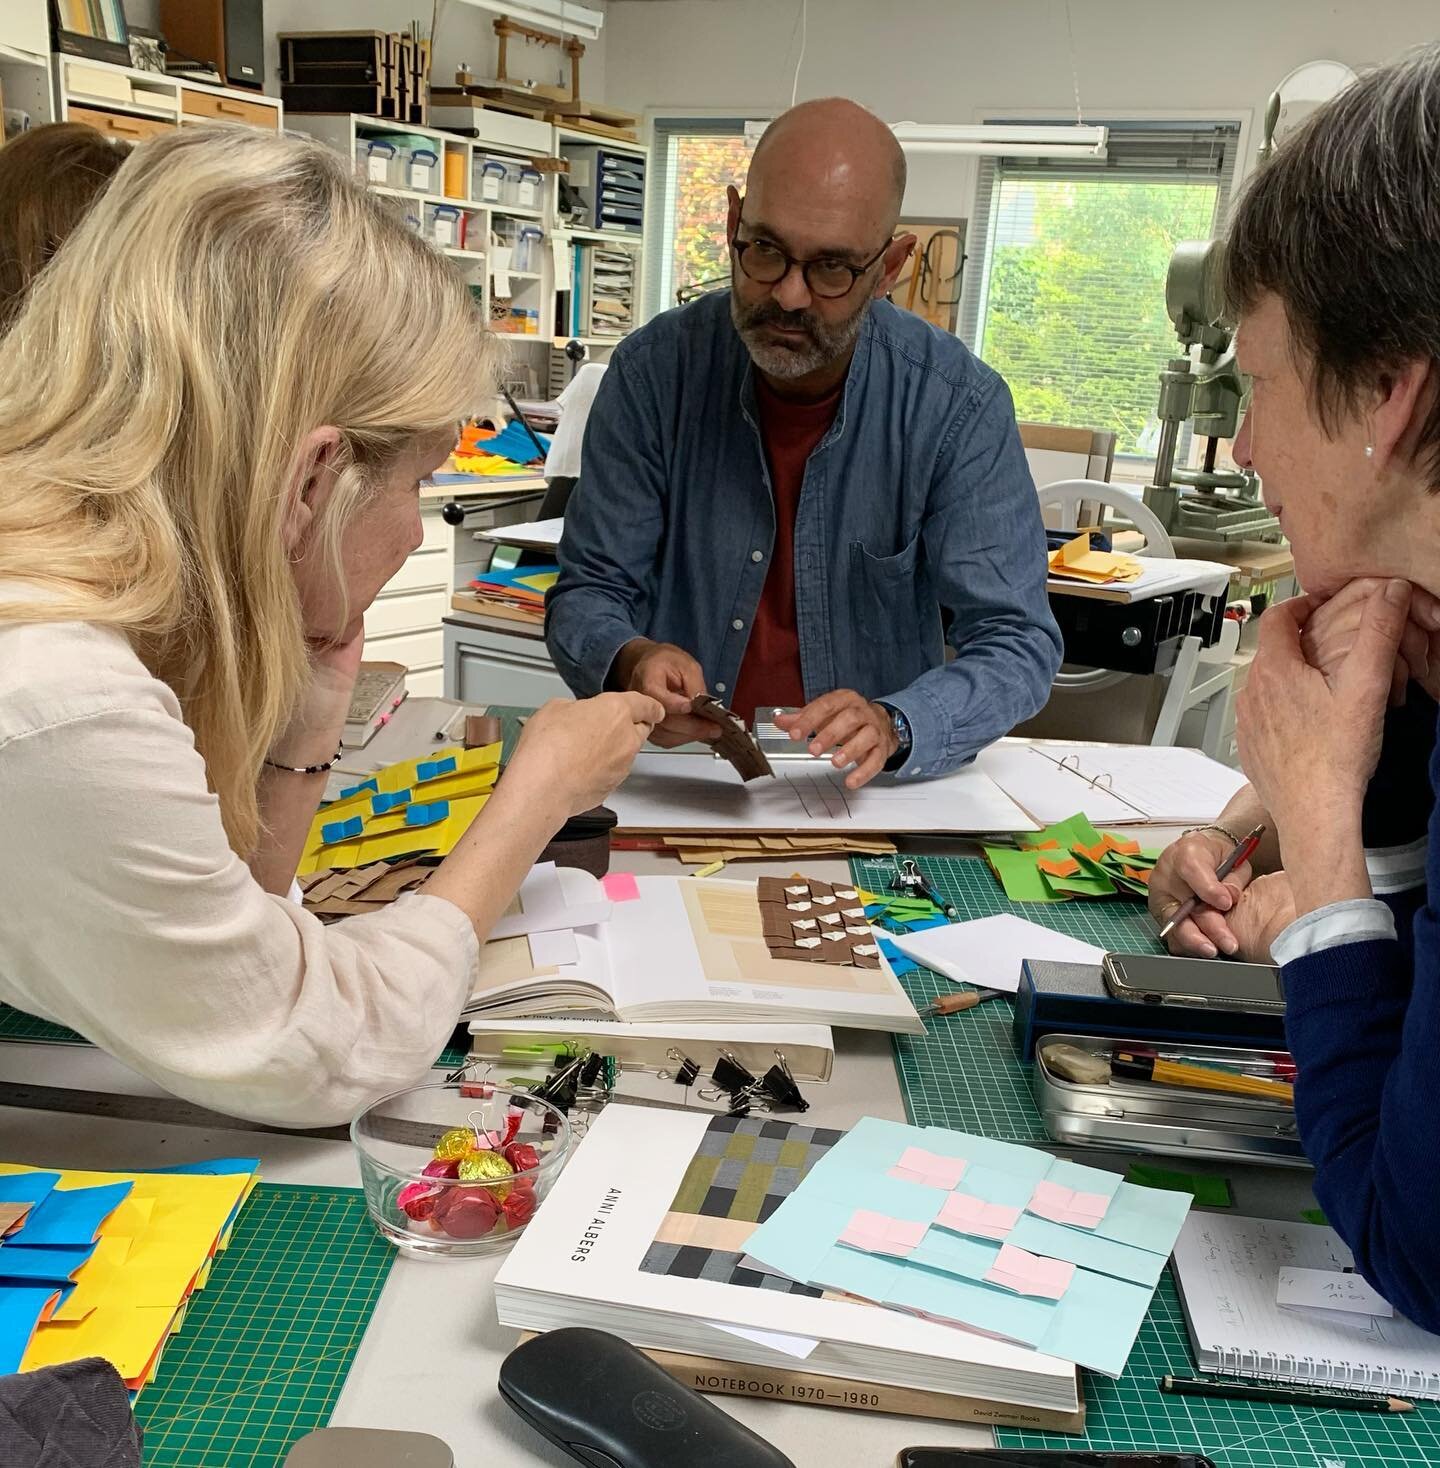 Feeling very fortunate to be in the Netherlands attending a workshop with the master of paper himself @dariozeruto A wonderful few days of learning, inspiration, colour and making new friends. Thank you Dario and Marja at the Boekbinderij Wilgenkamp 